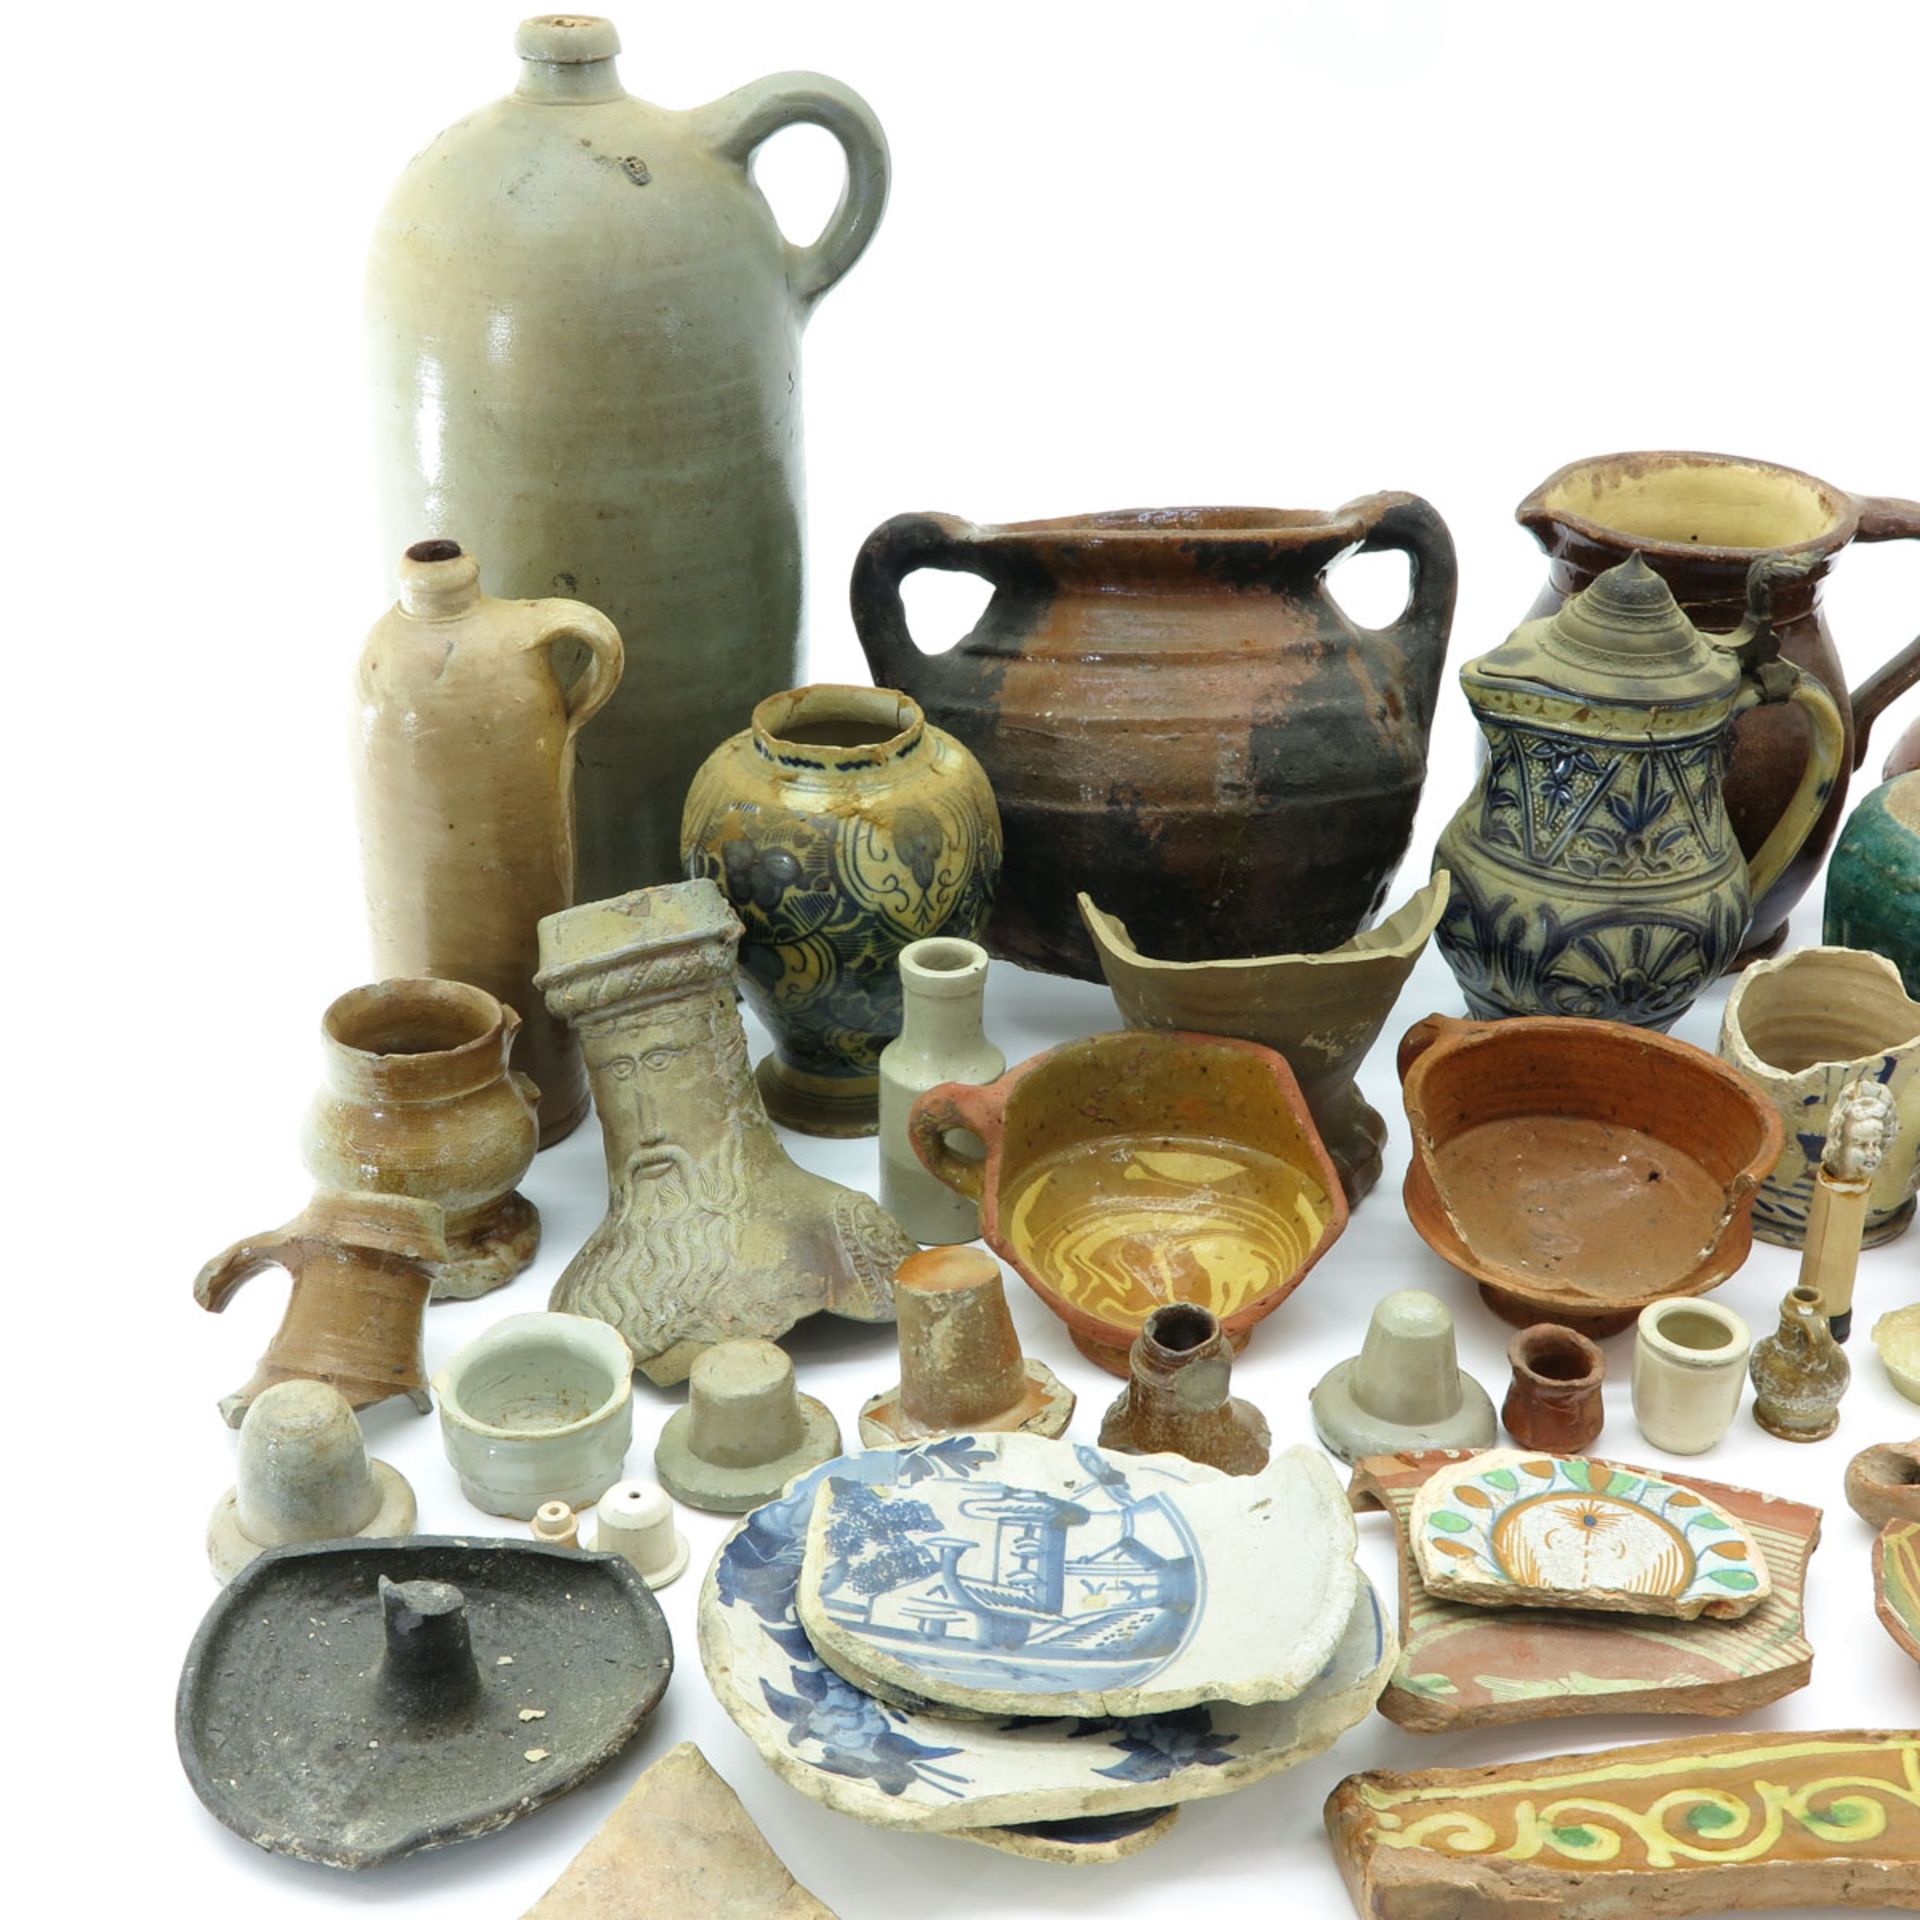 A Collection of European Pottery and Ship Wreck Finds - Image 2 of 3